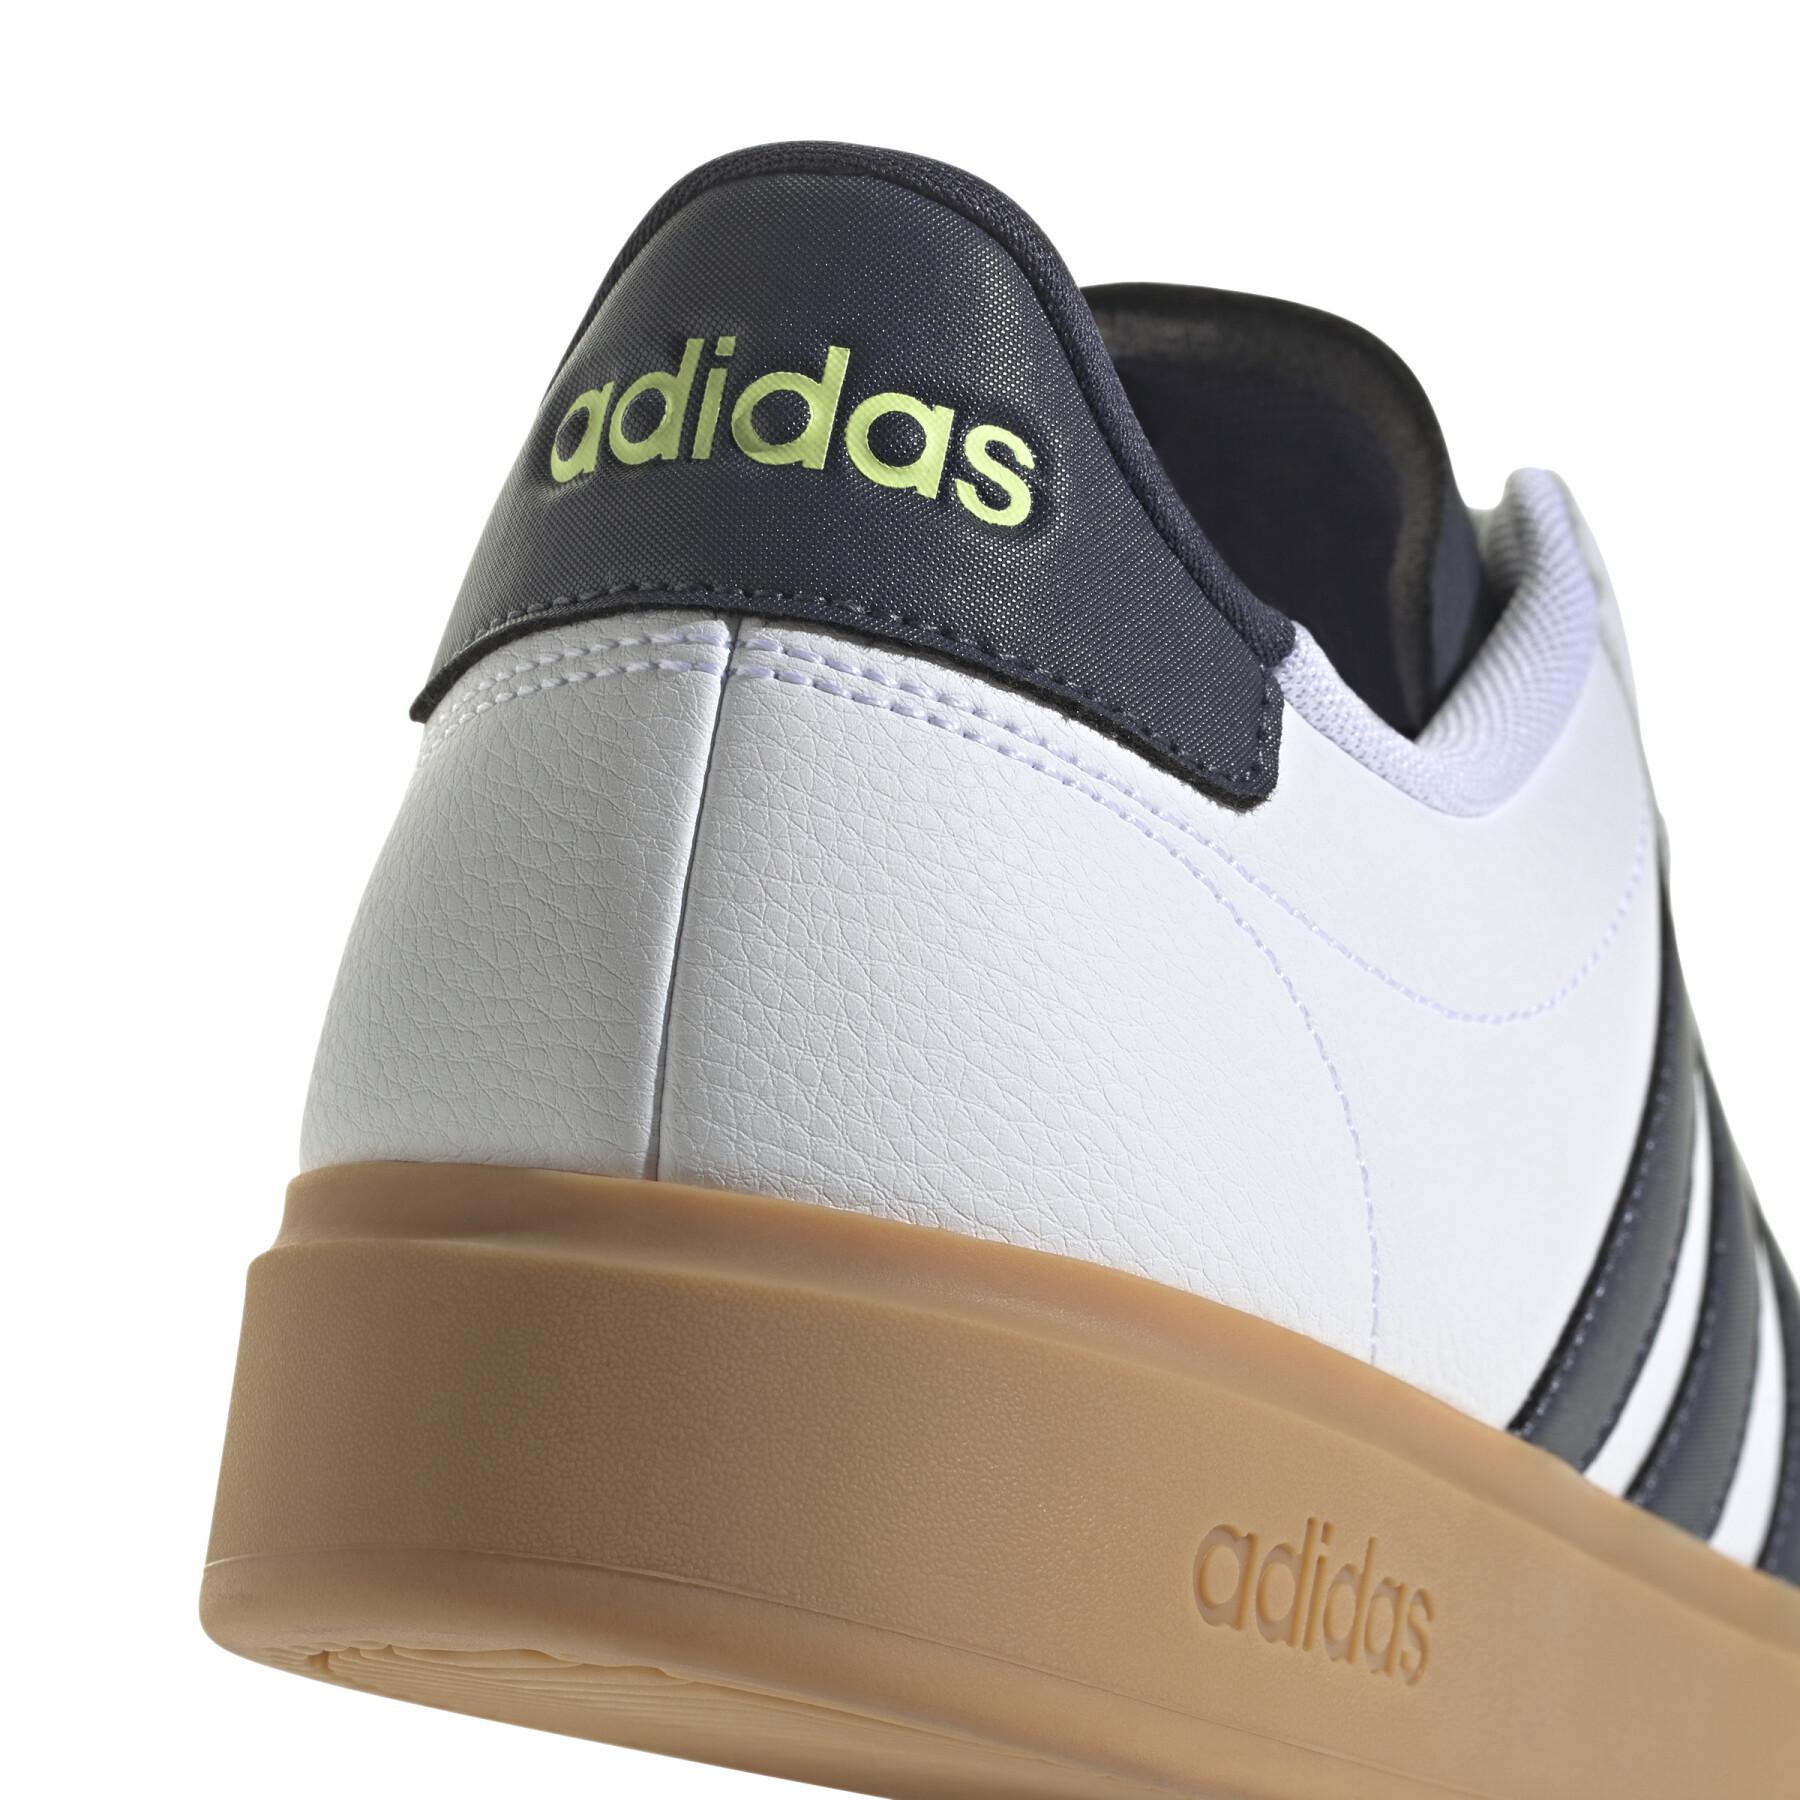 Sneakers adidas Grand Court 2.0